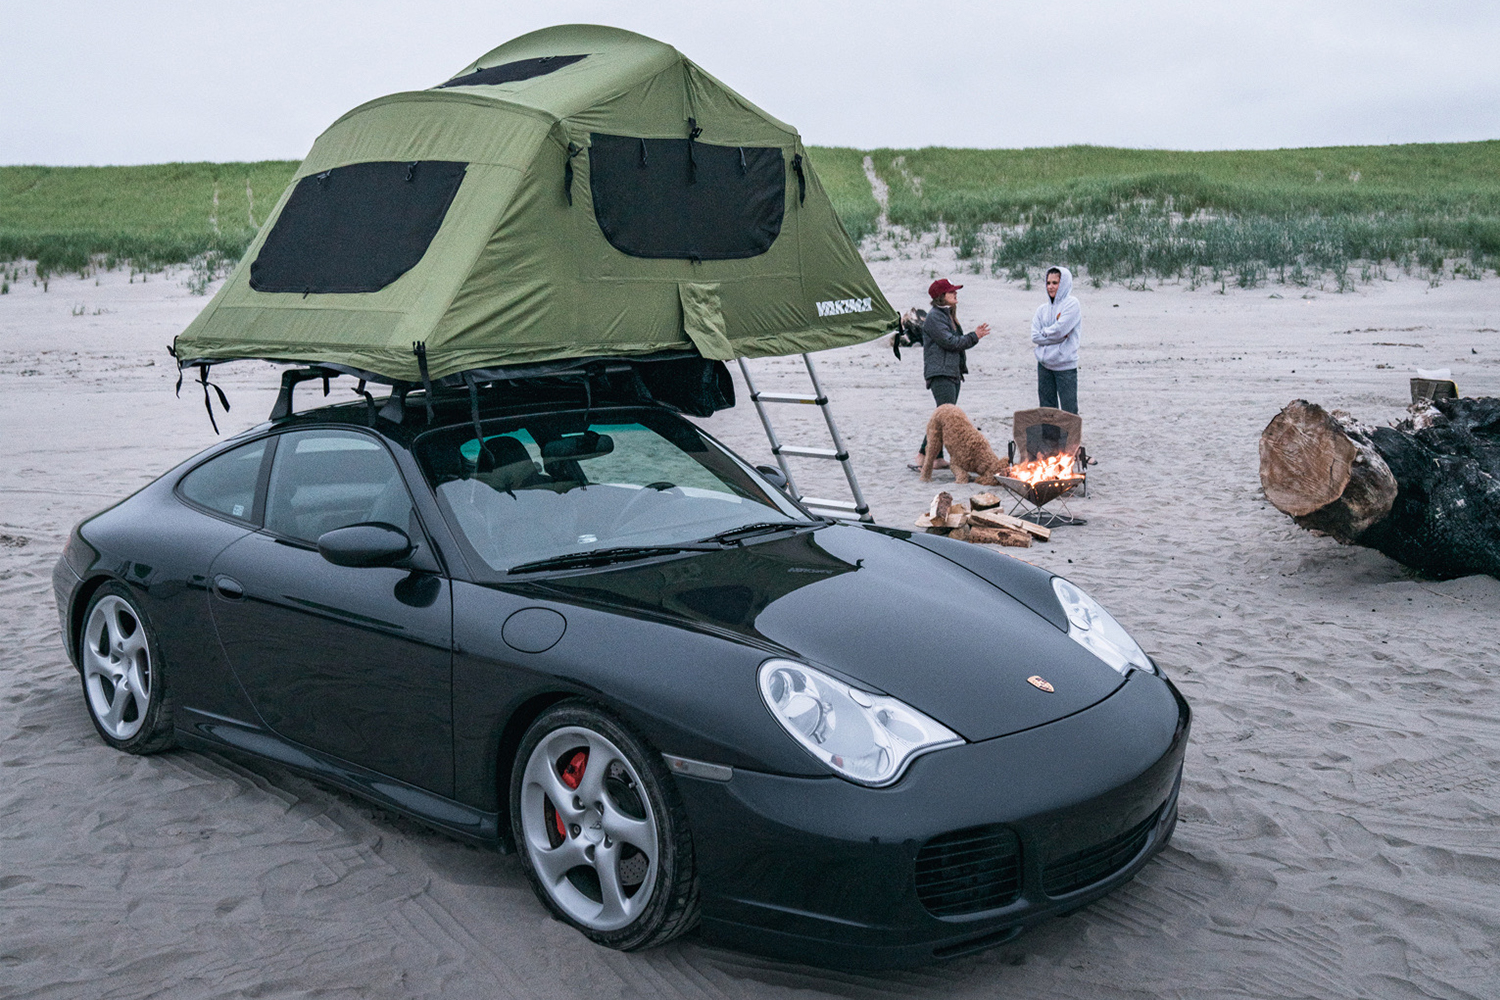 A black 2004 Porsche 996 C4S, or Porsche 911, with a green Yakima rooftop tent owned by Brock Keen of Instagram handle @996roadtrip sitting on a beach with two women in the background next to a campfire